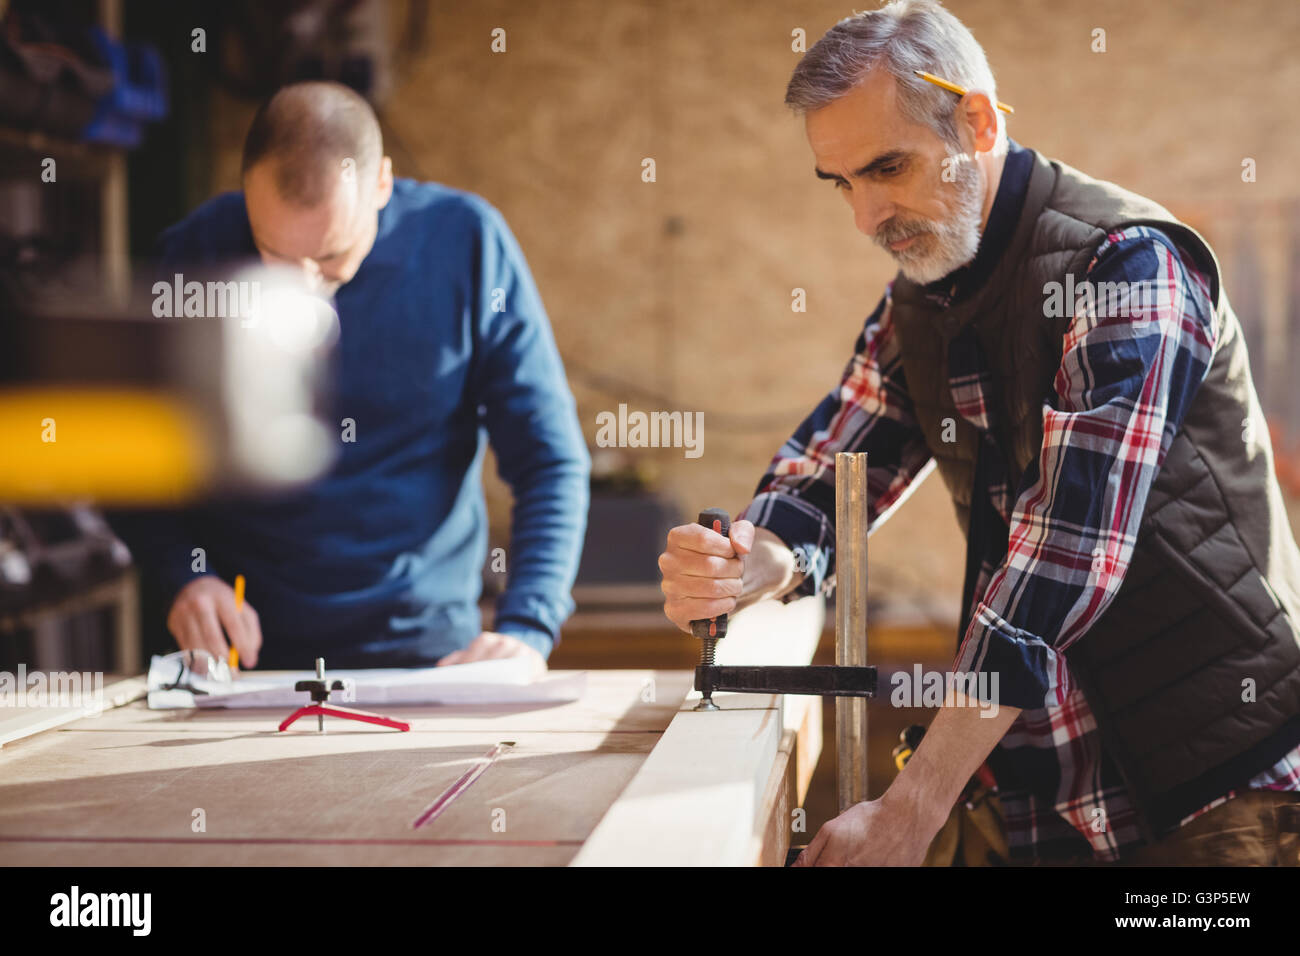 Carpenter fixing a plank of wood Stock Photo